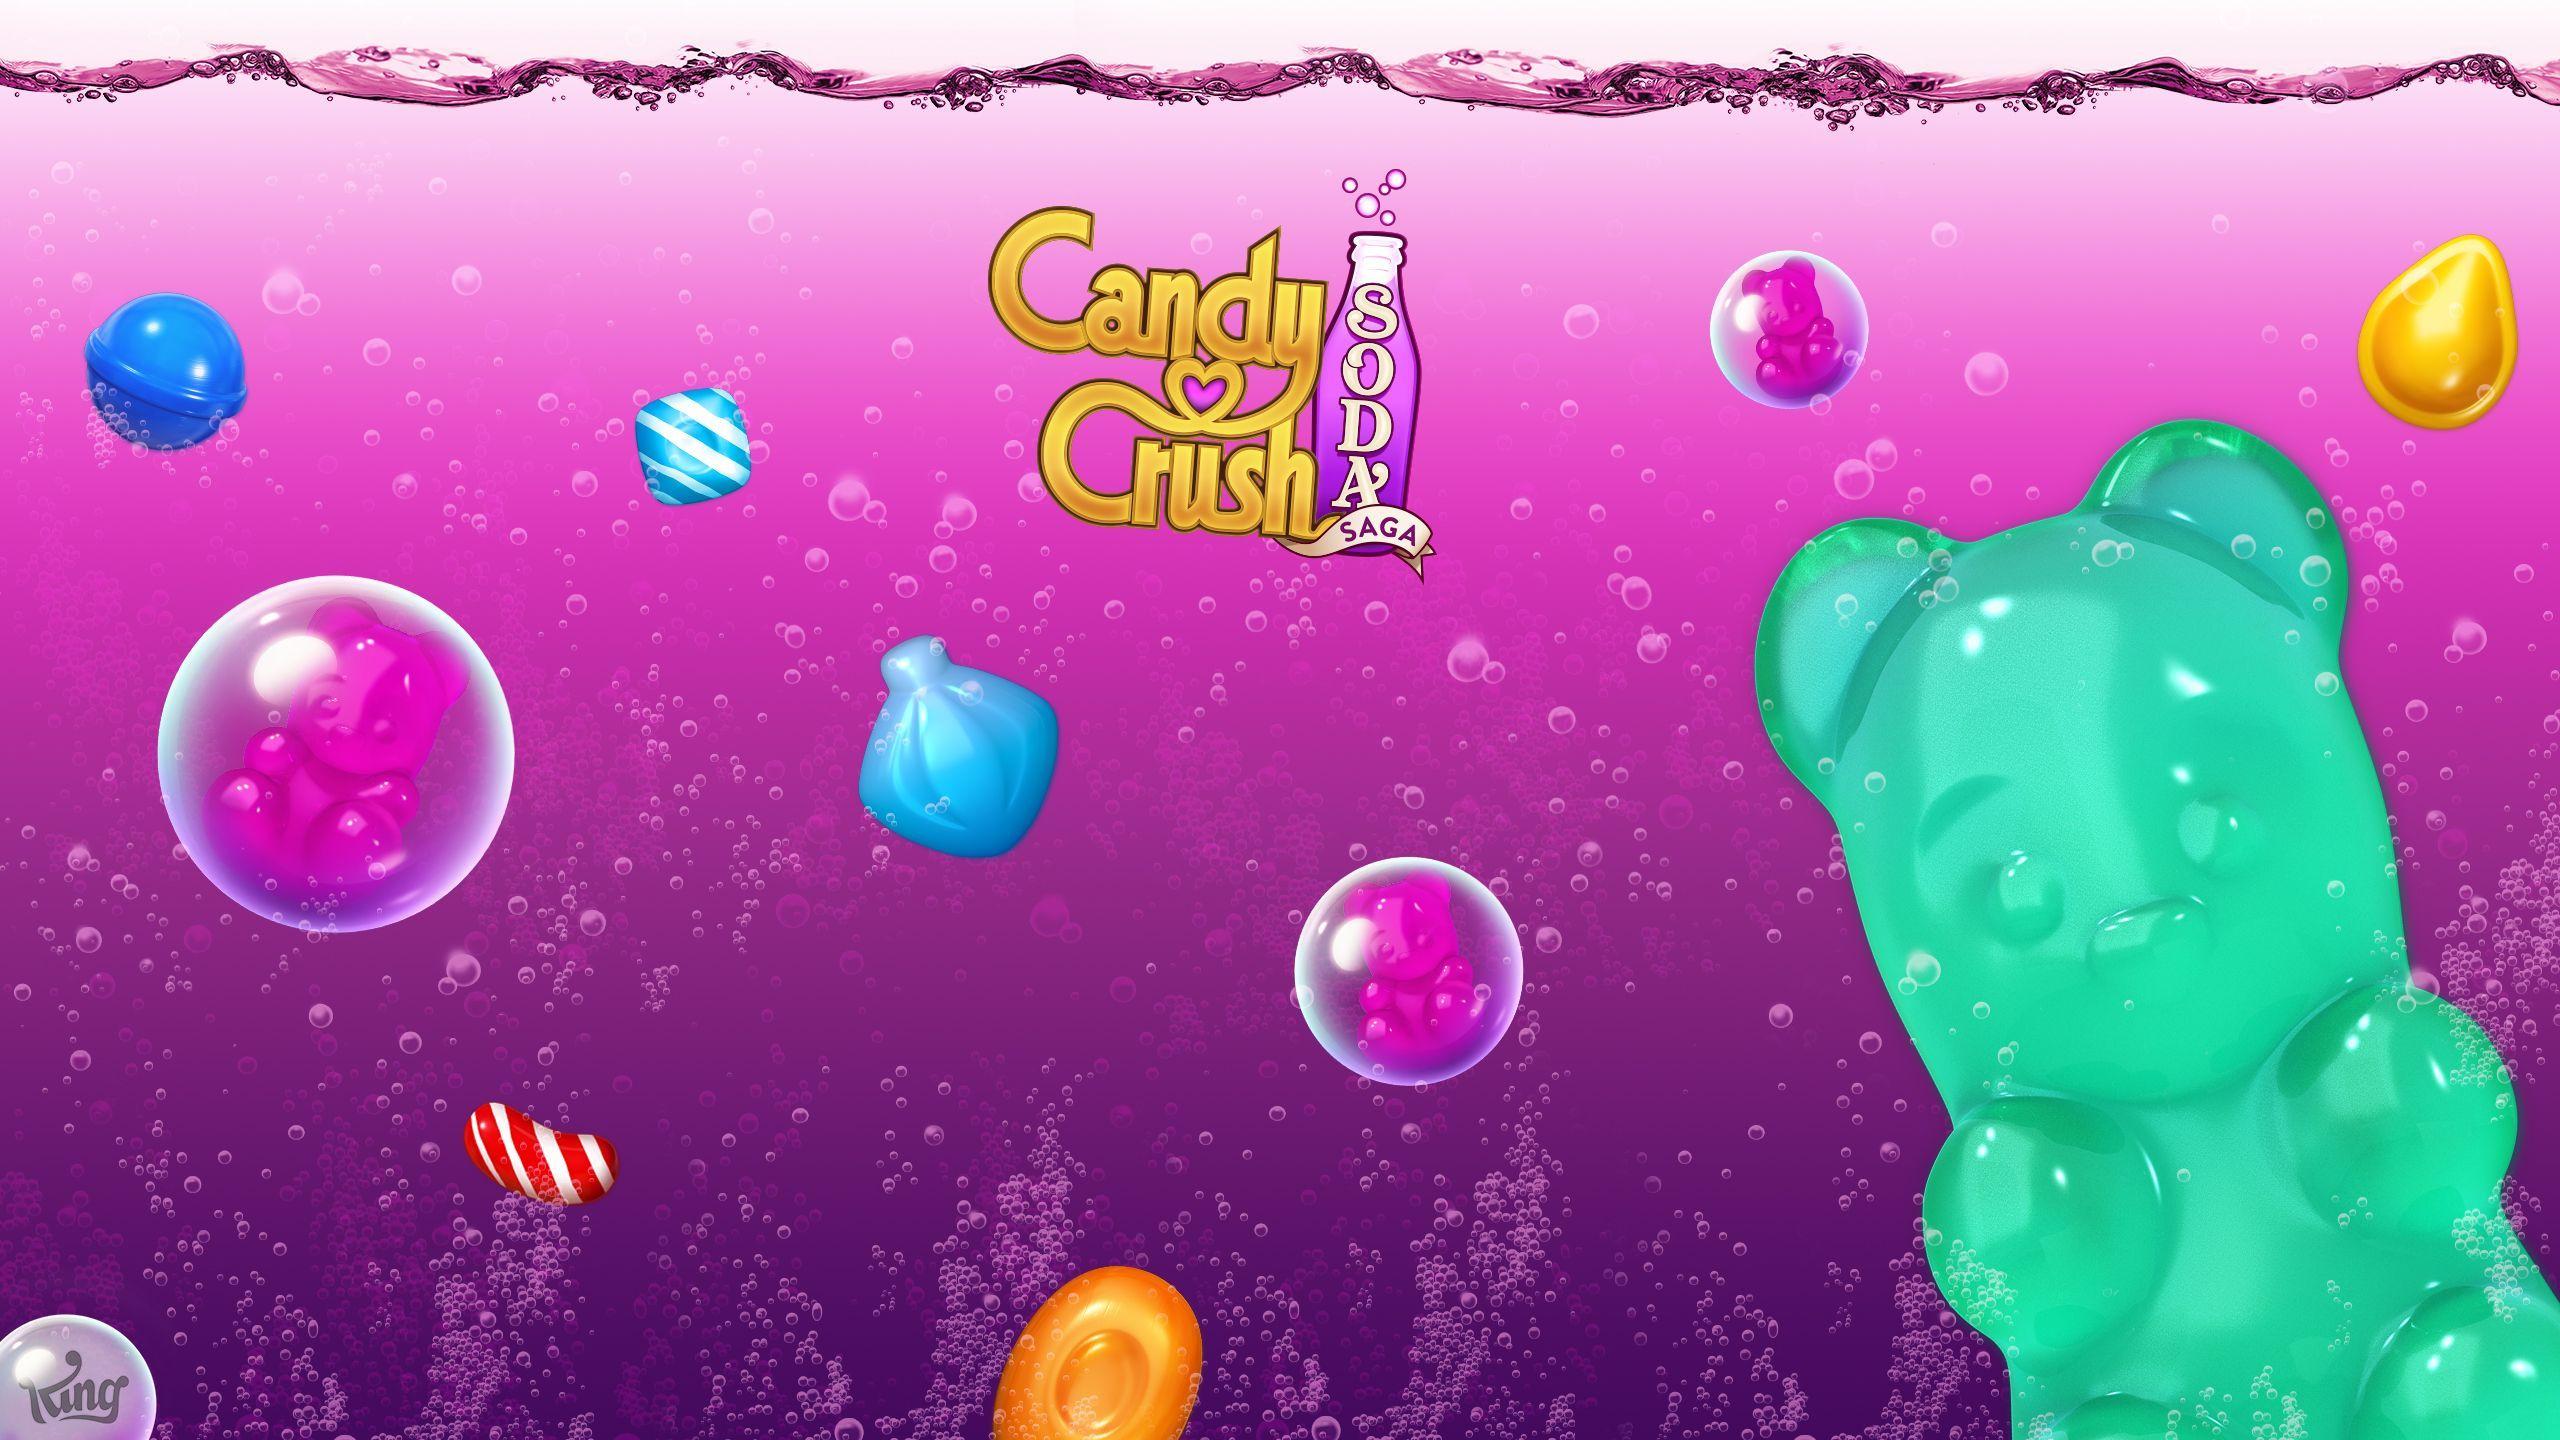 Candy Crush Cheats Unlimited amounts of Resources